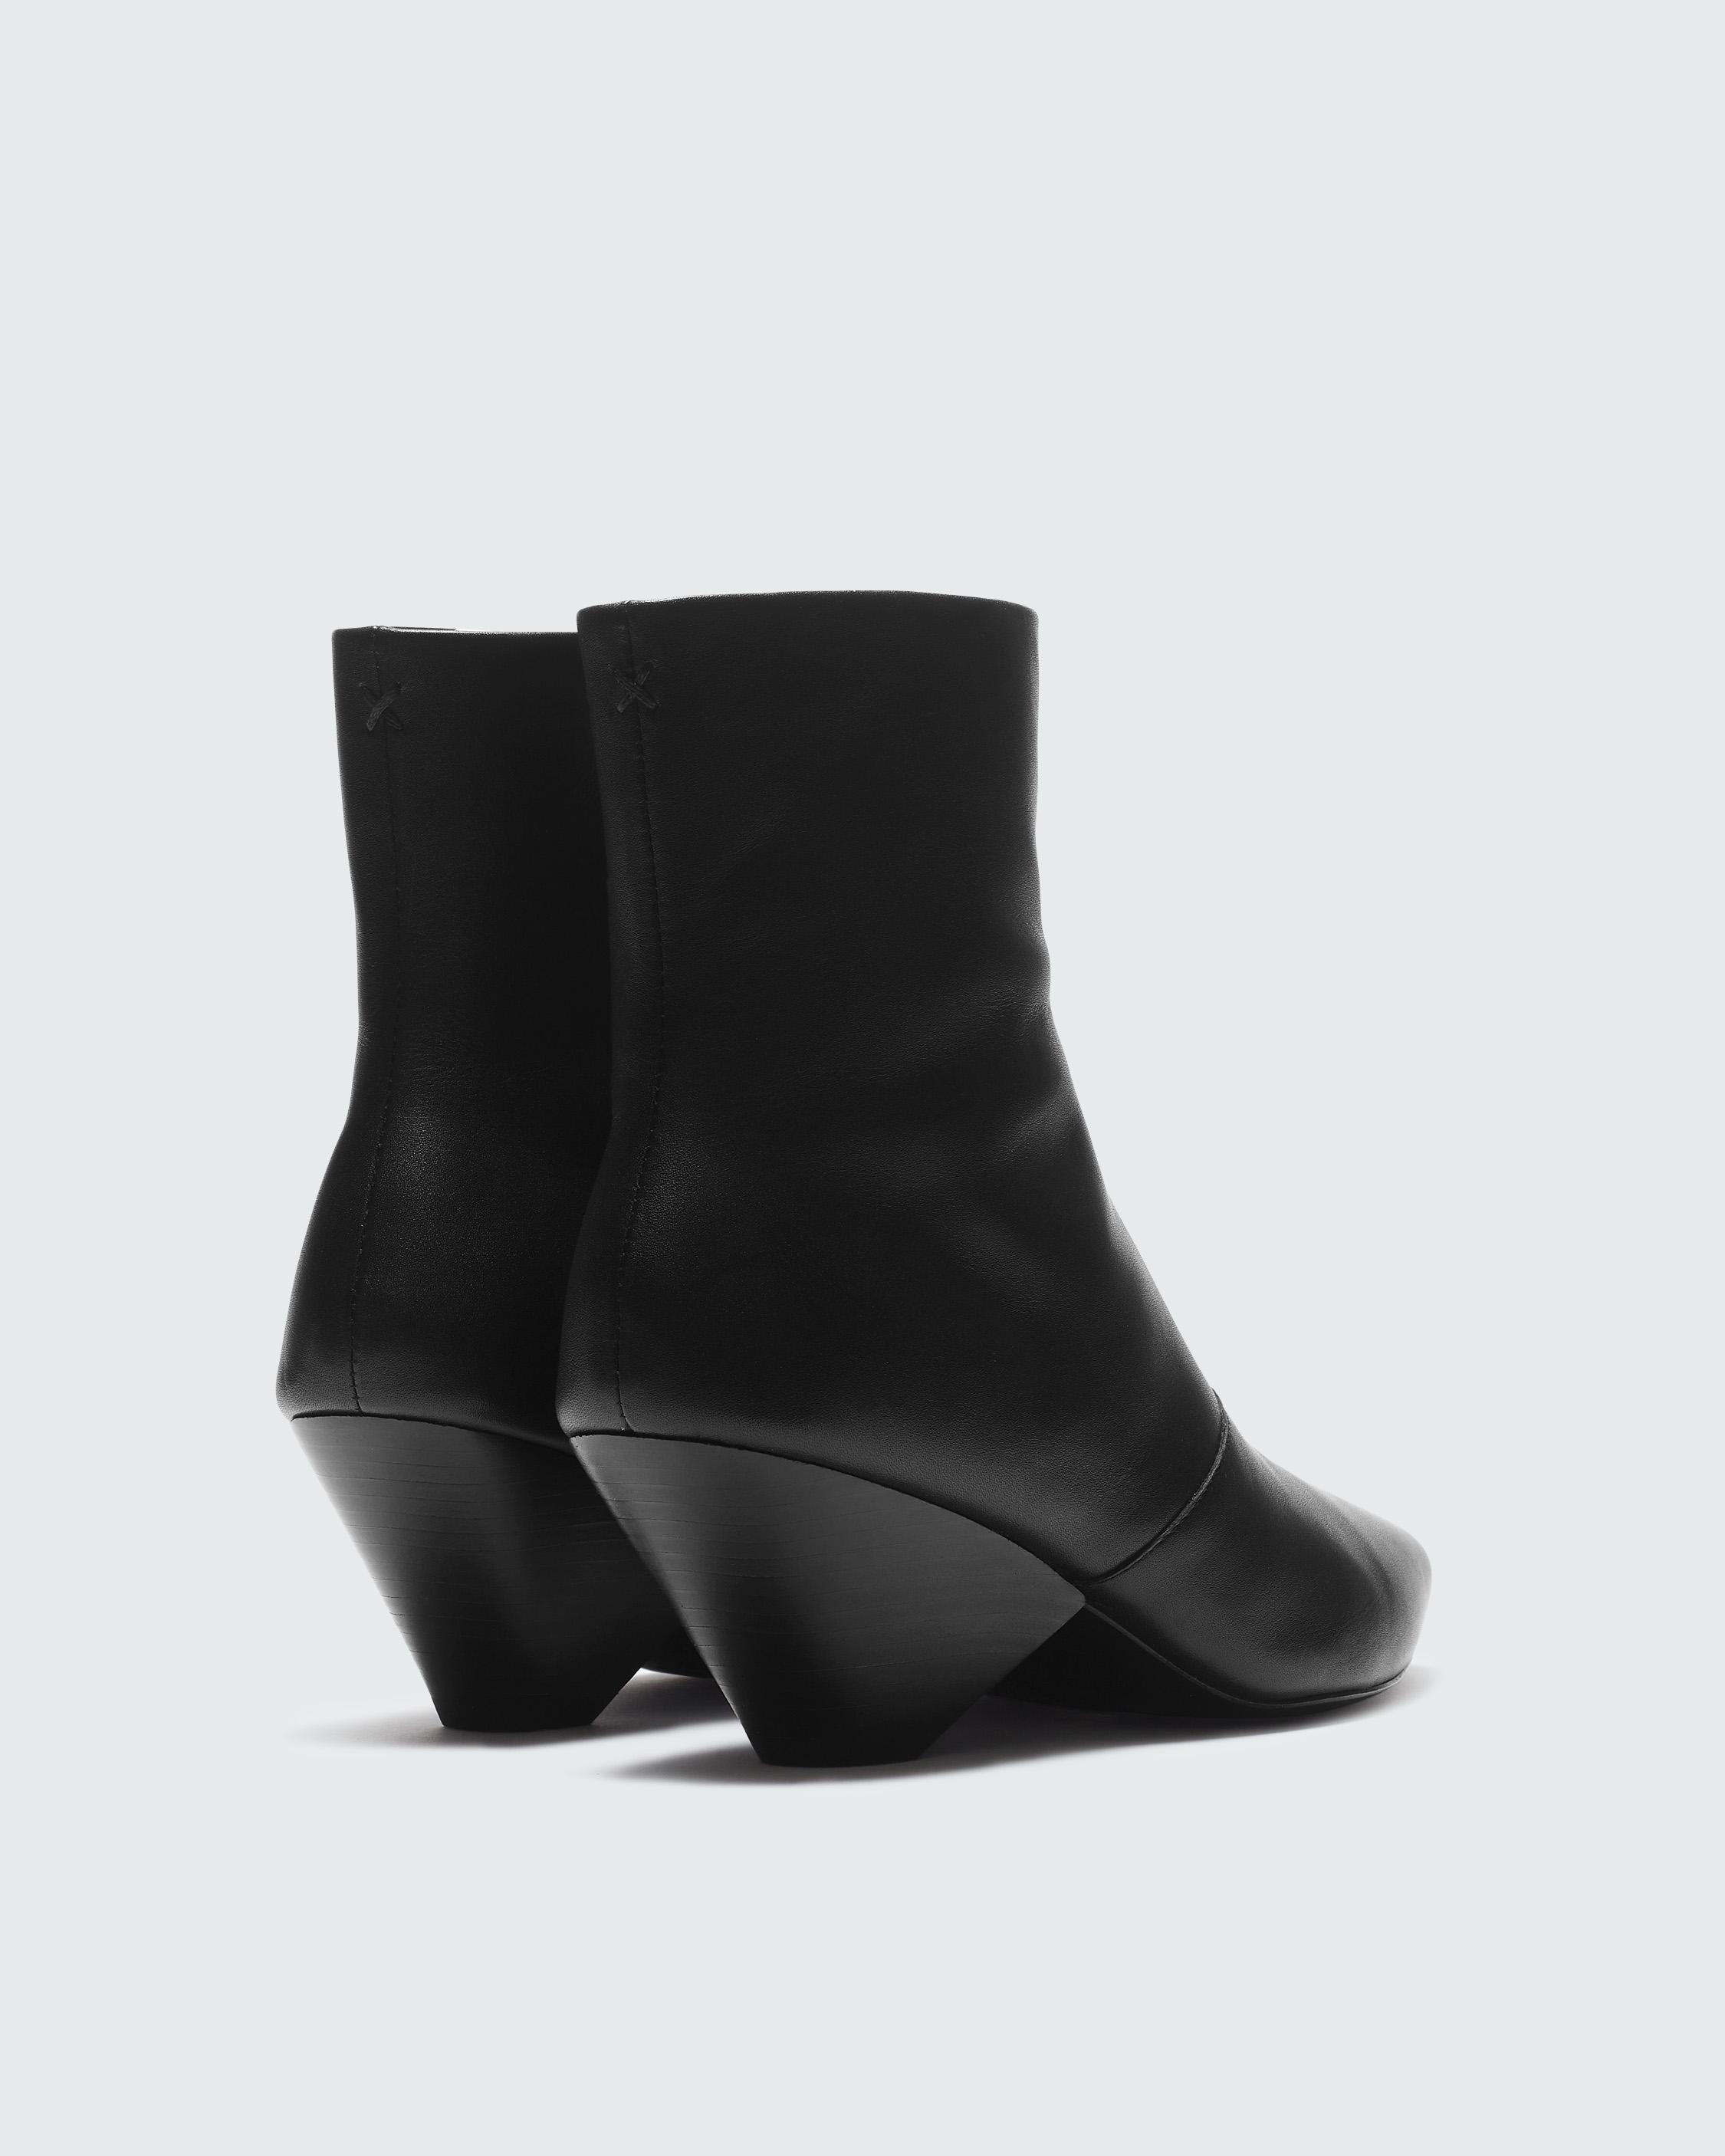 Spire Boot - Leather
Heeled Ankle Boot - 3